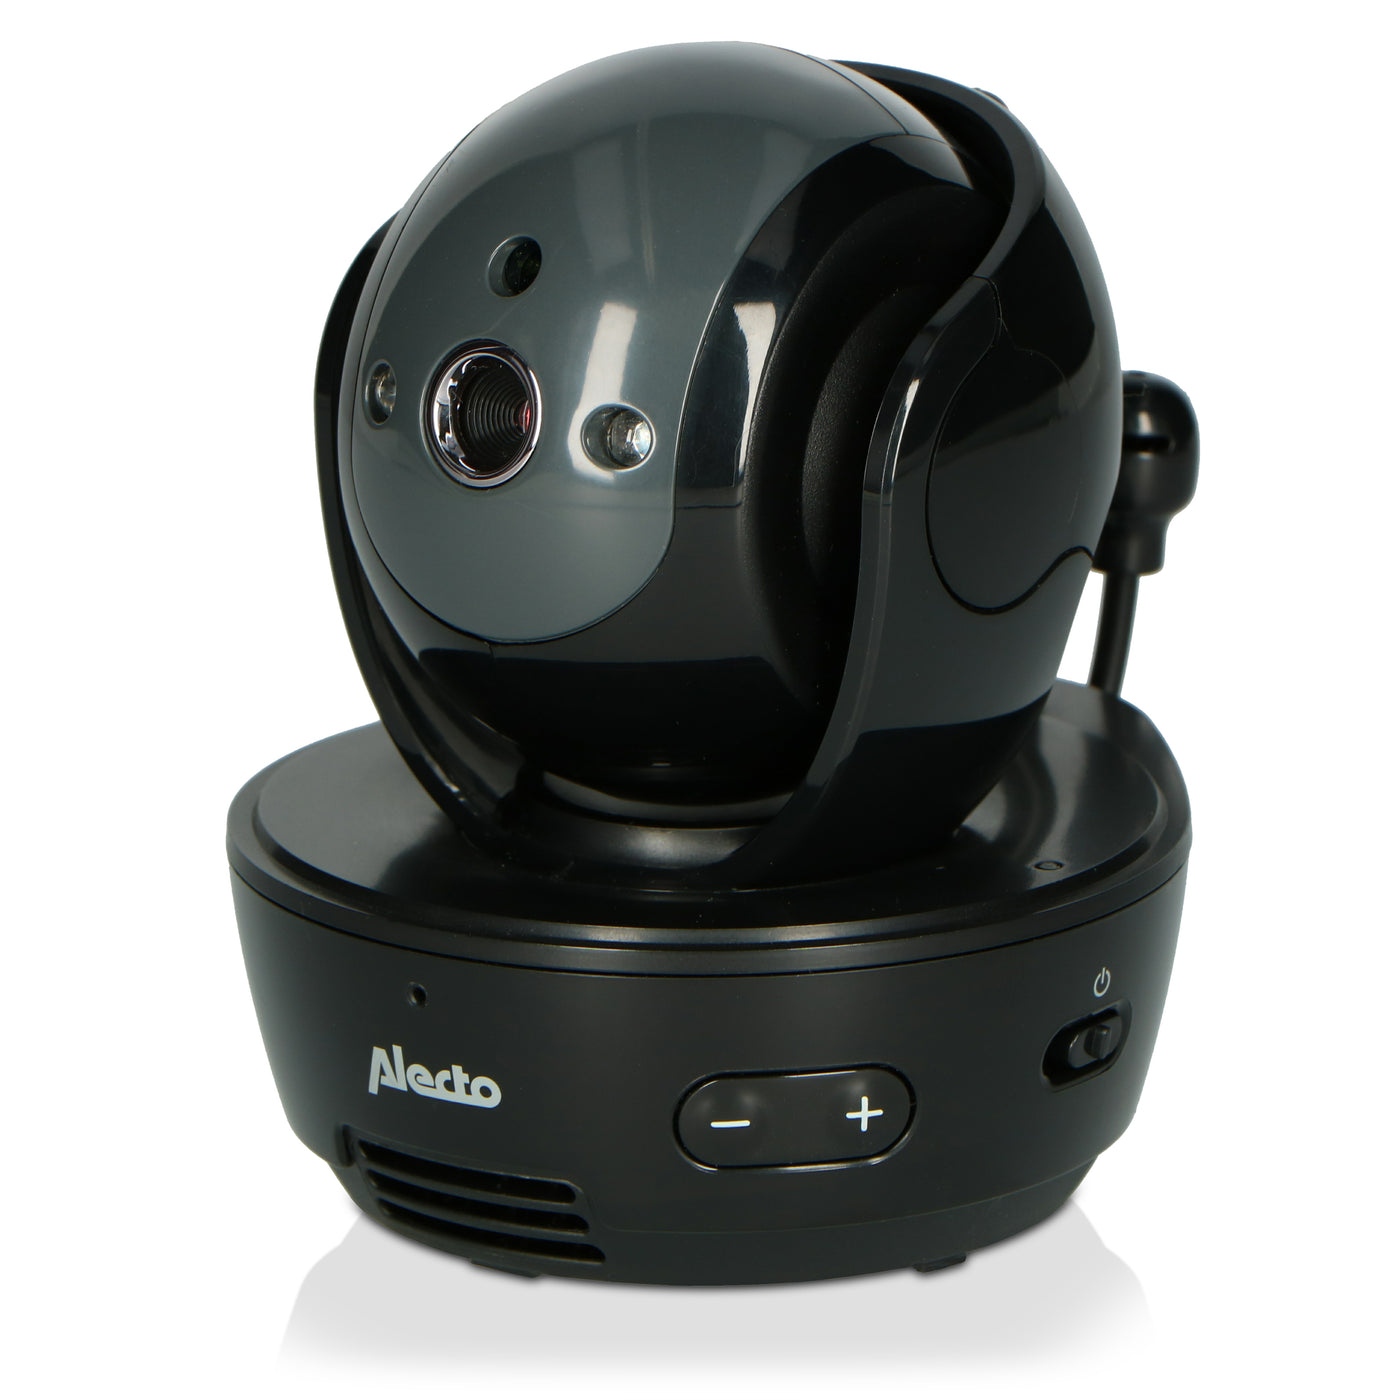 Alecto DVM200MBK - Video baby monitor with 4.3" colour display, black